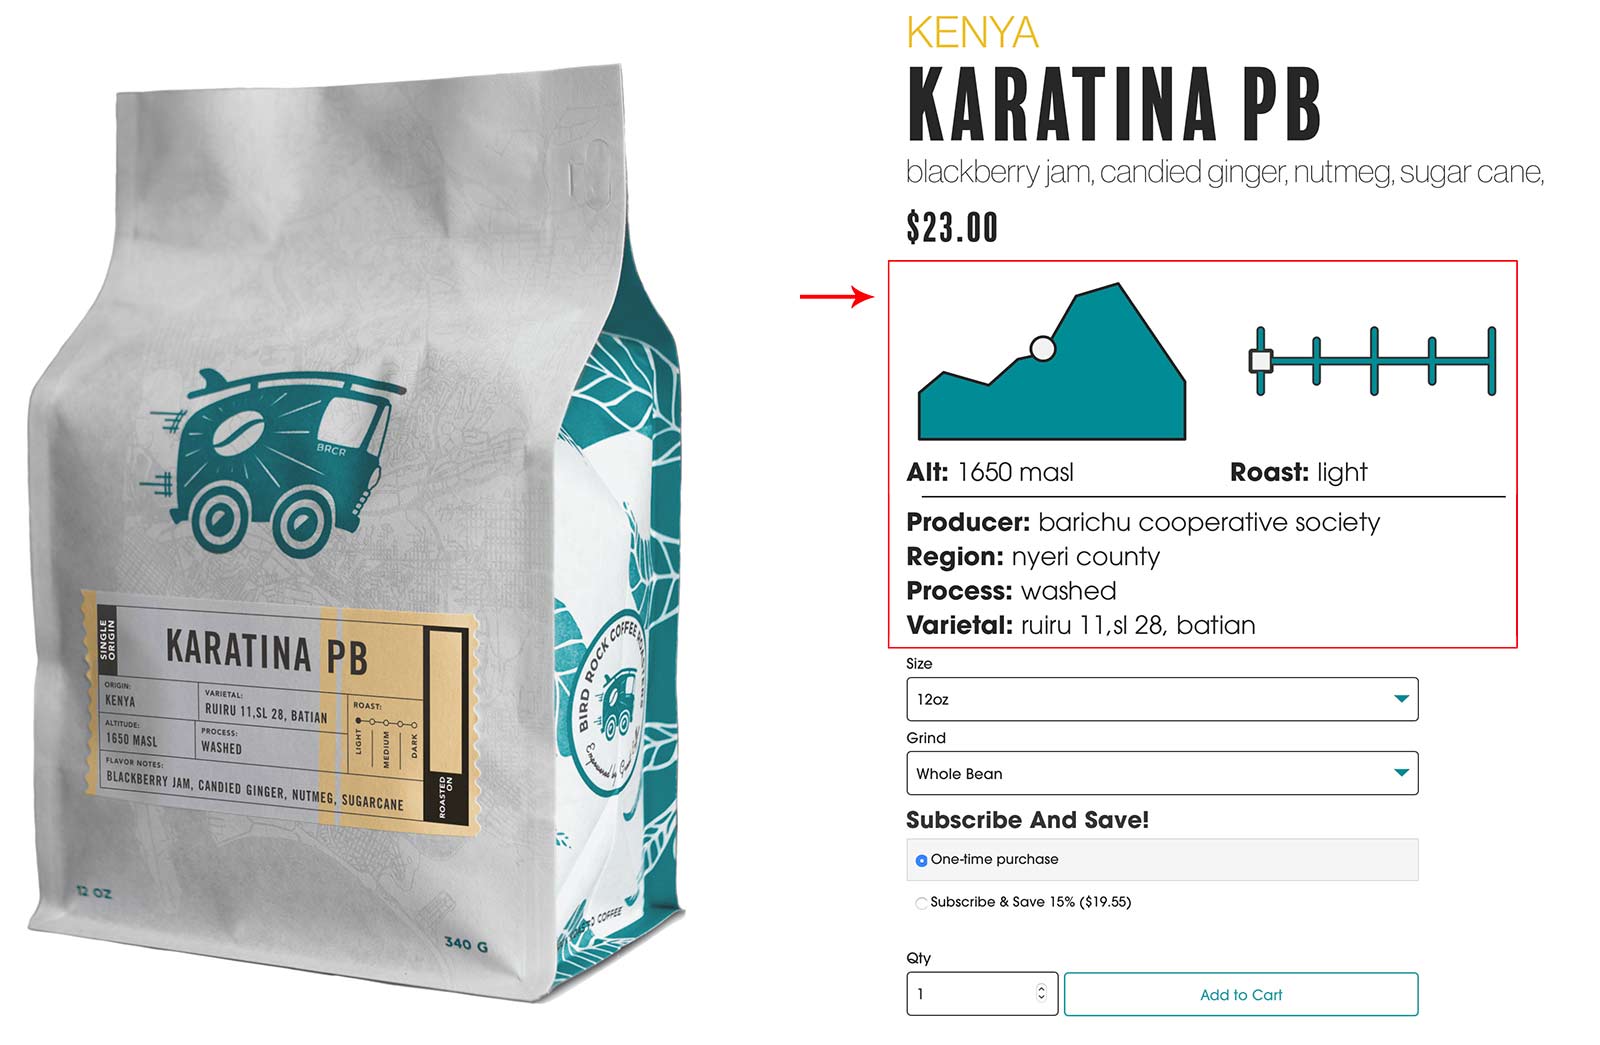 Bird Rock Coffee Product Page - featuring a chart for altitude and roast level